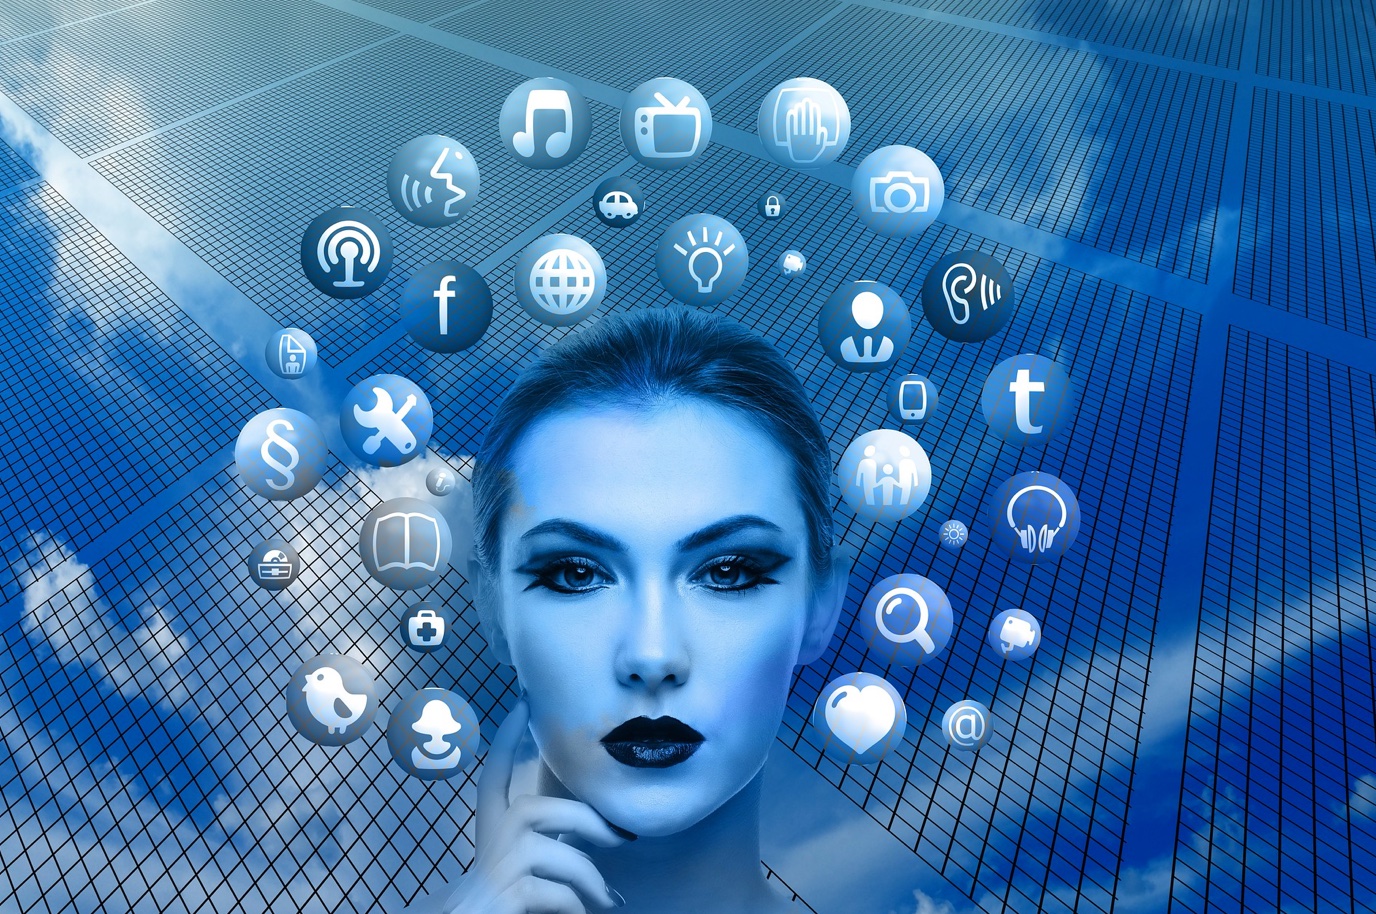 Woman's face surrounded by social media icons; image by geralt, via Pixabay.com.